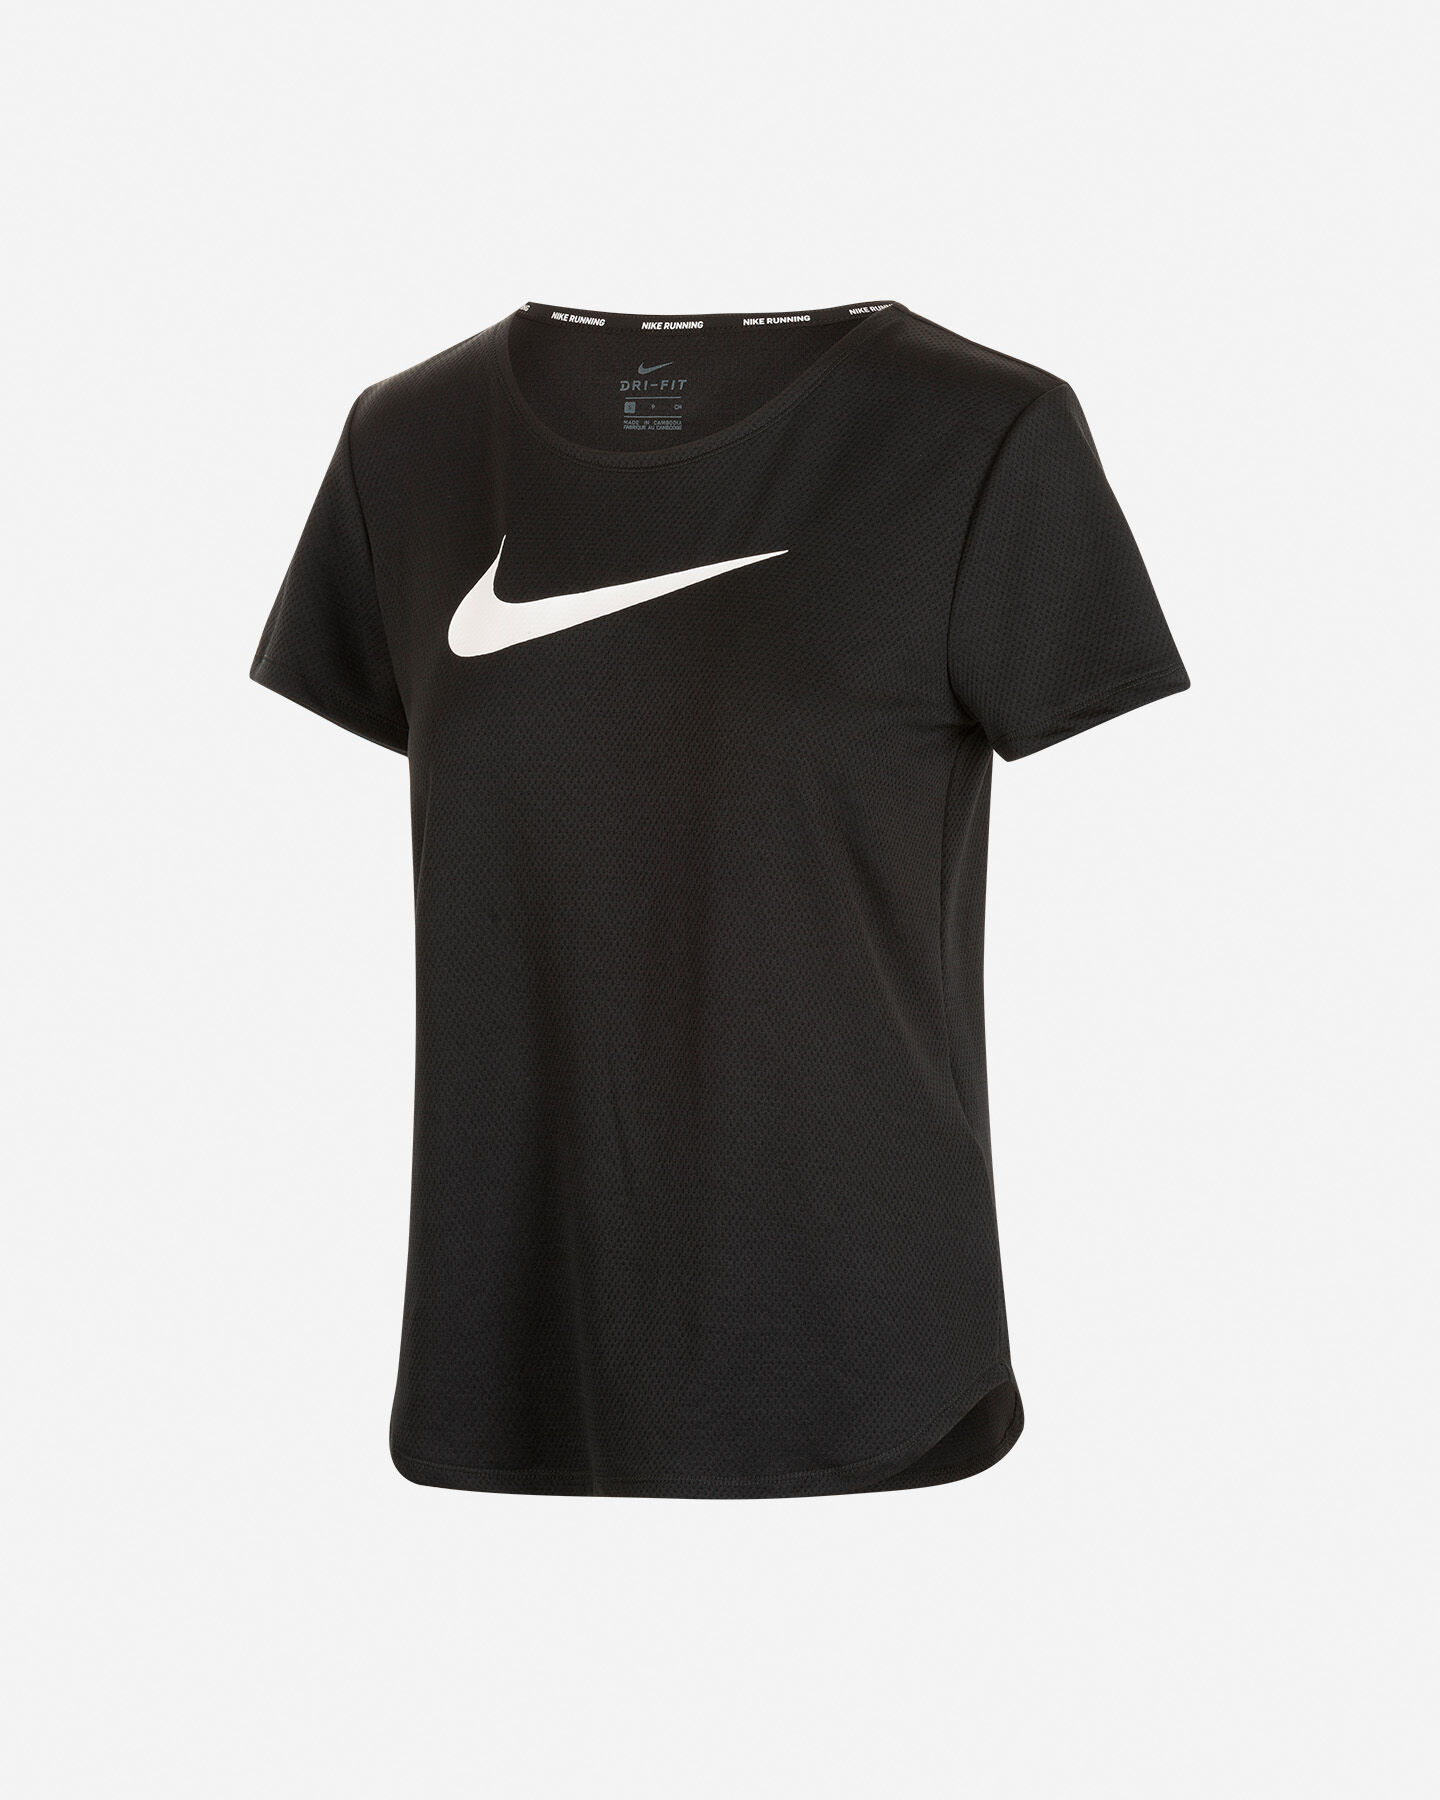  T-Shirt running NIKE ICON CLASH W S5371647|010|XS scatto 0